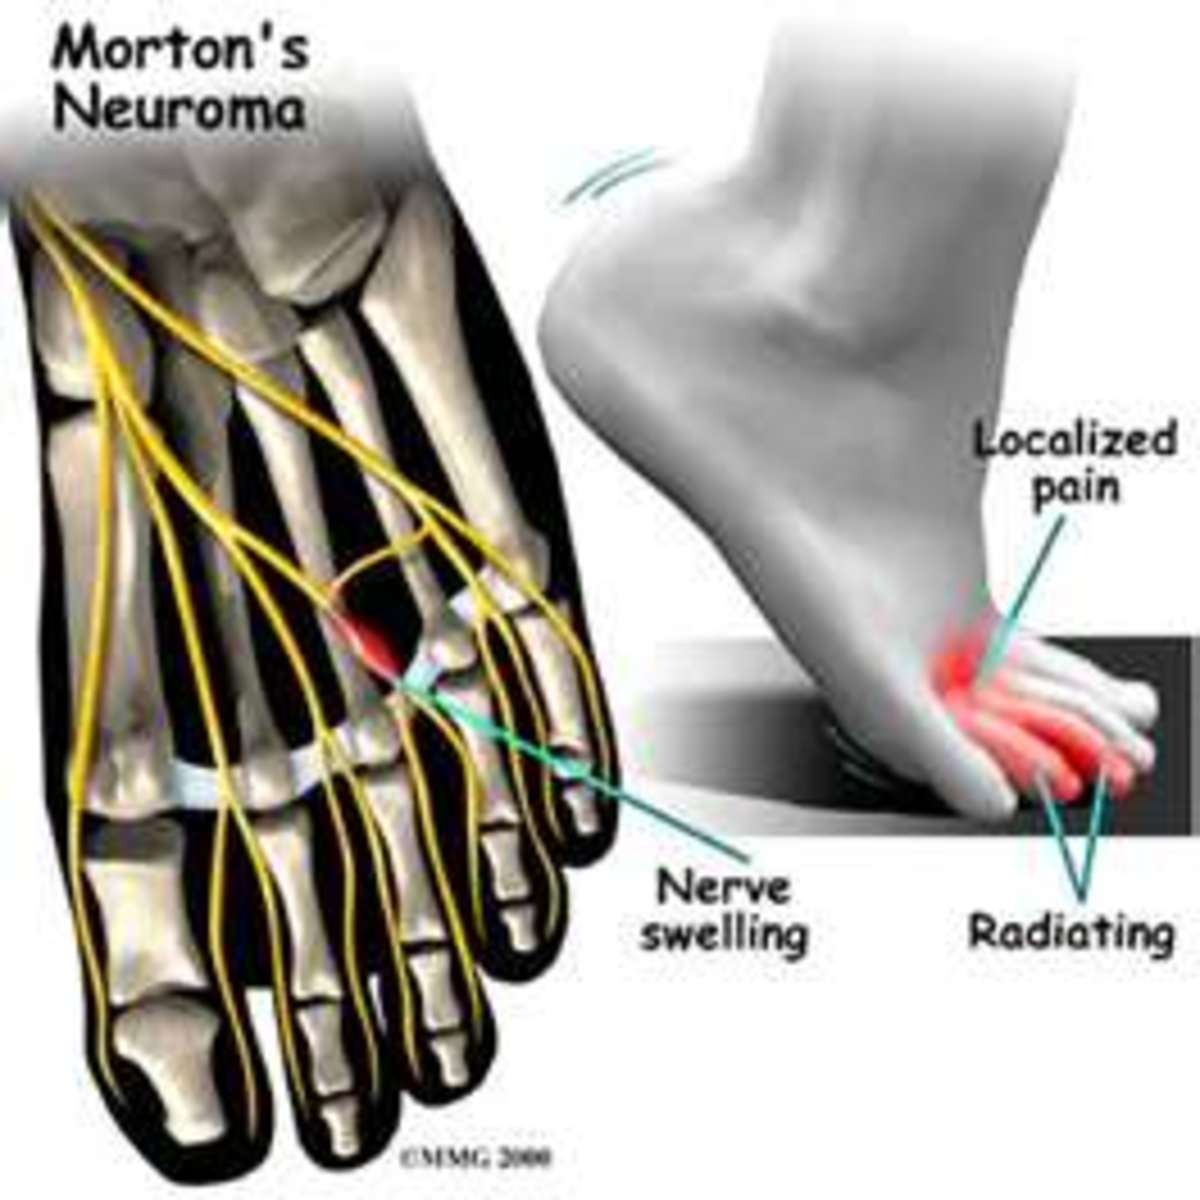 Mortons Neuroma - Revised information and natural pain relief.